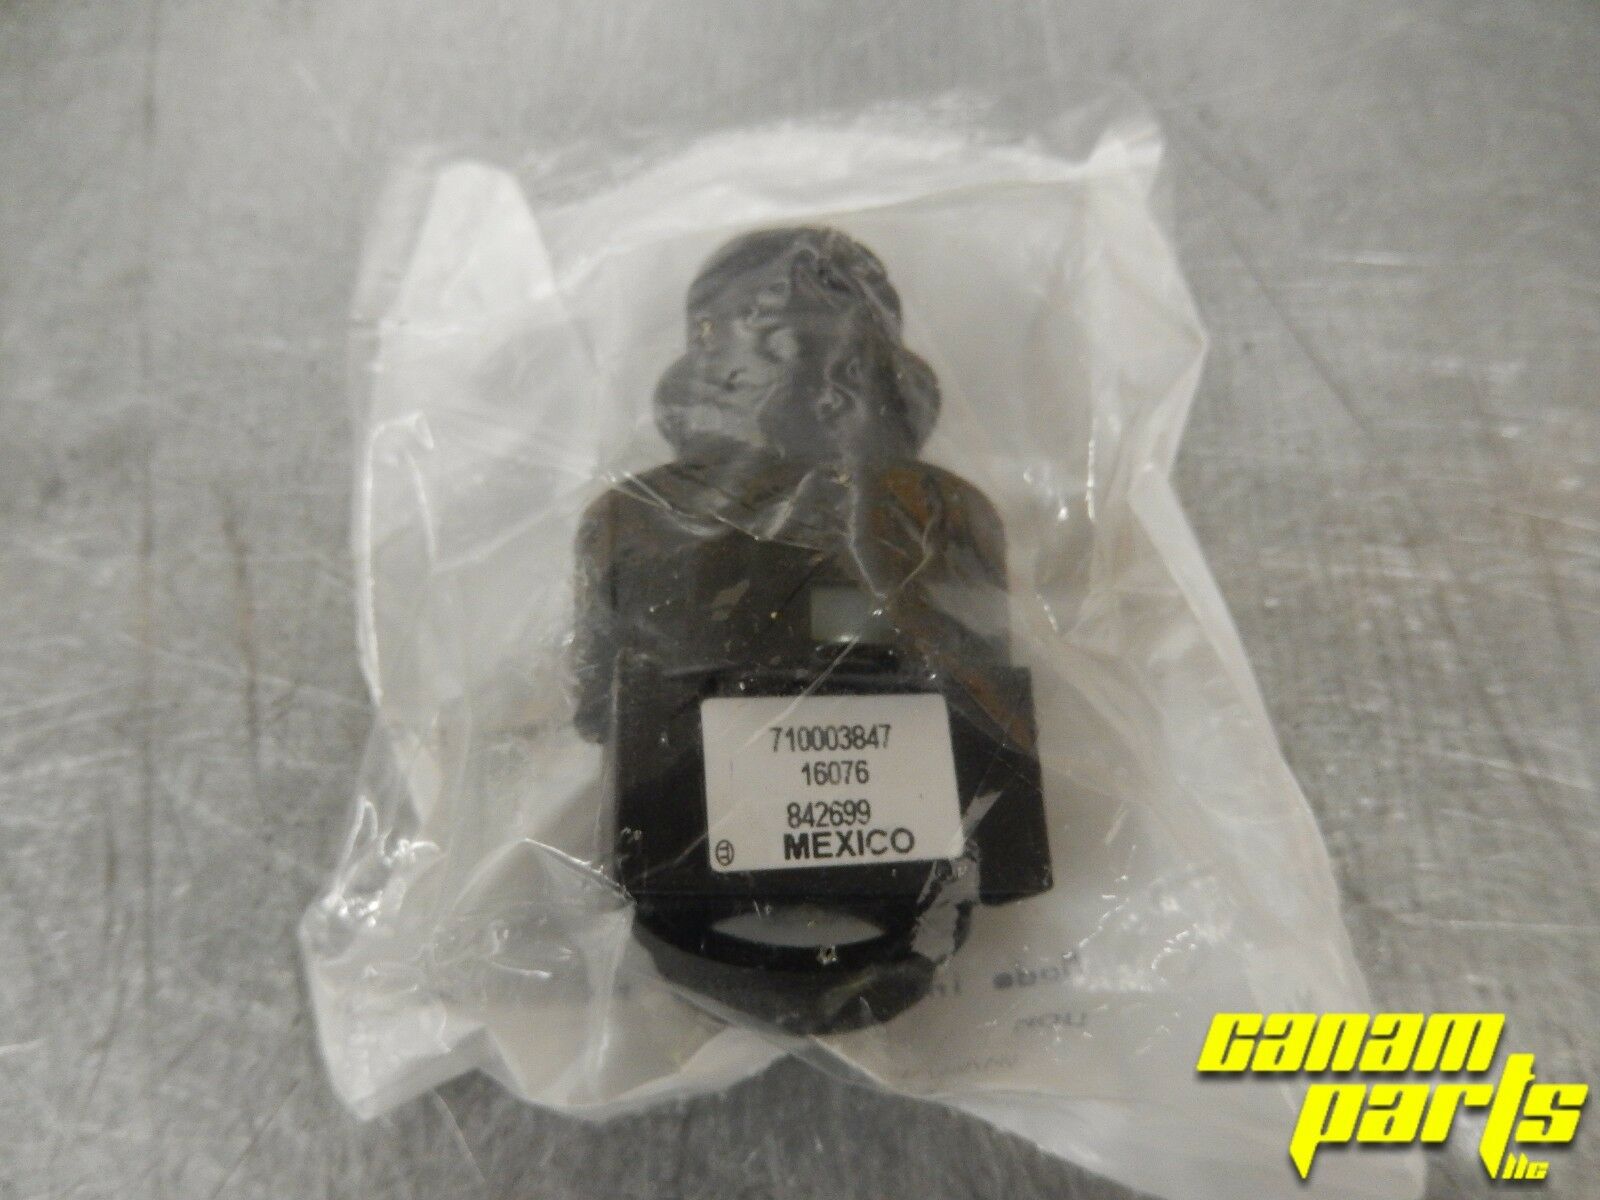 710003847 Can-Am New OEM Ignition 